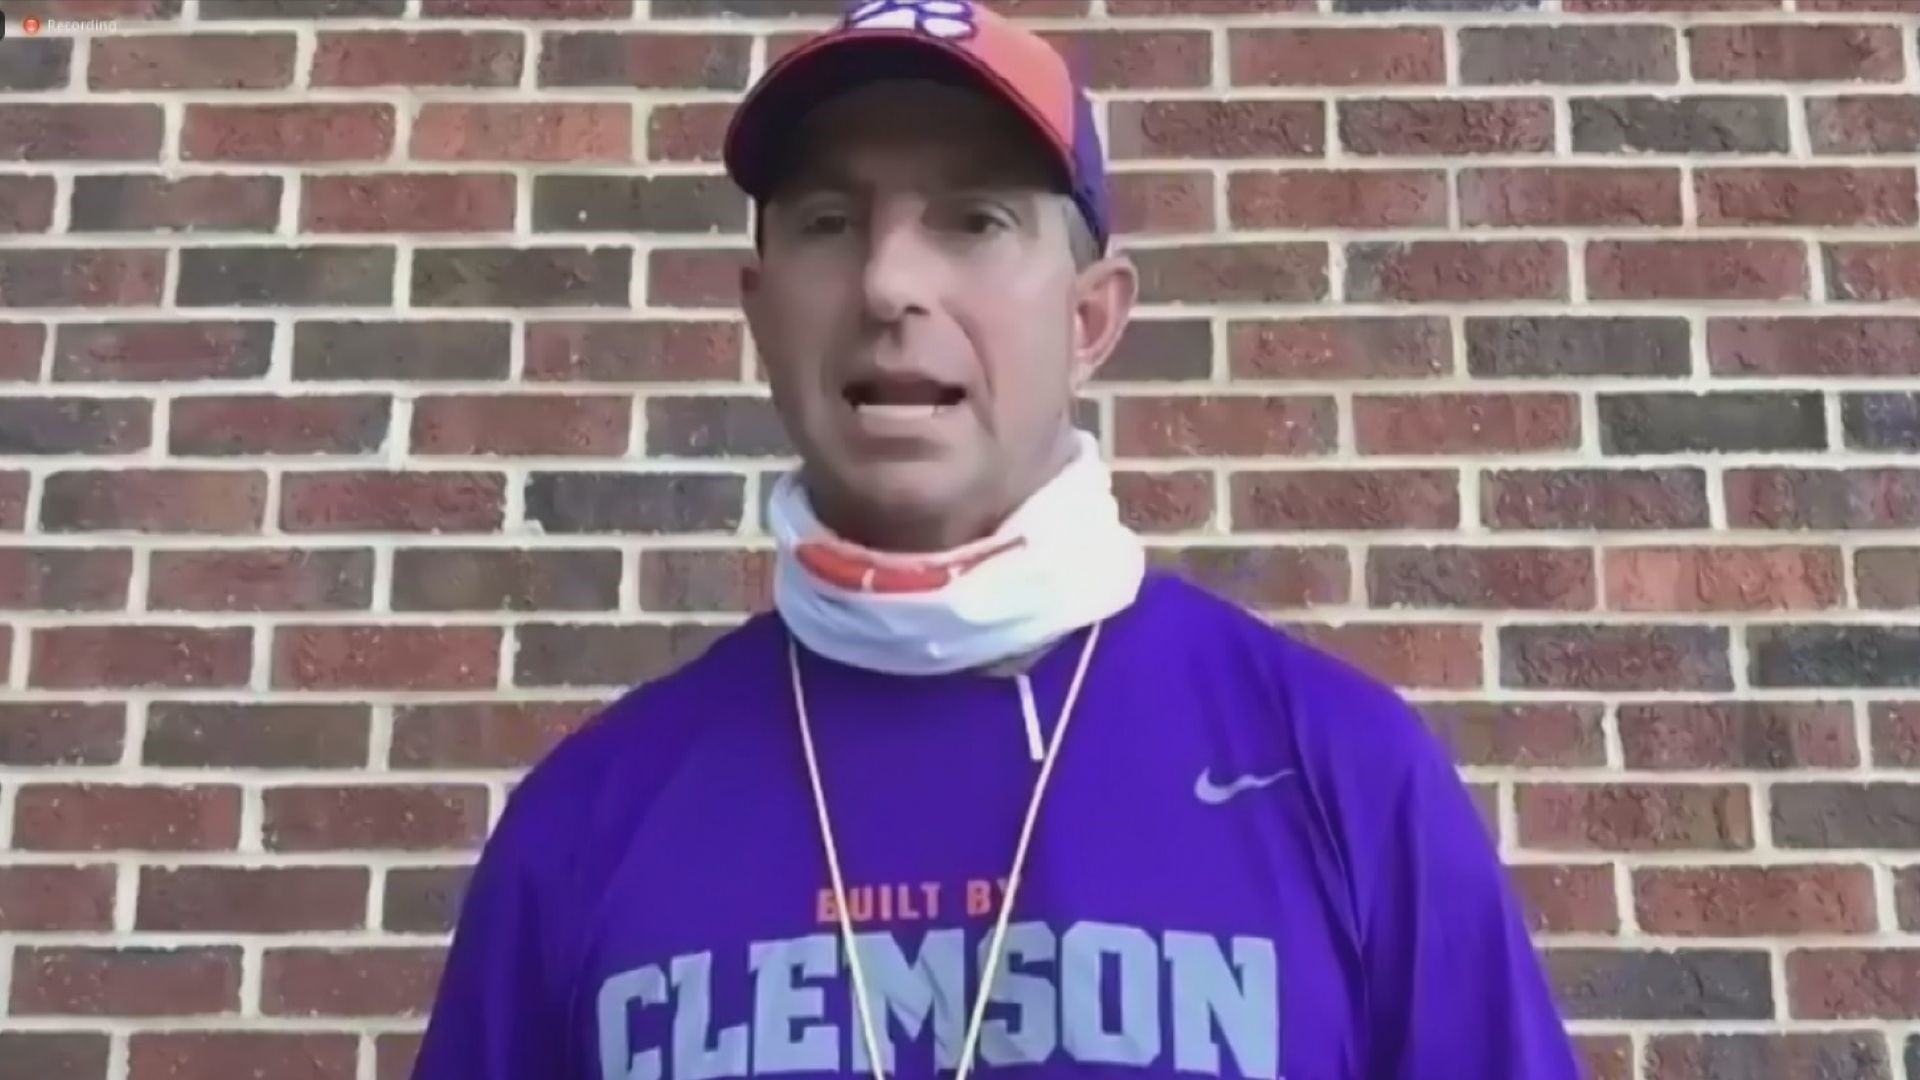 Clemson Coach Dabo Swinney said his player are excited to play and he believes it will be safer for them on the team than elsewhere.